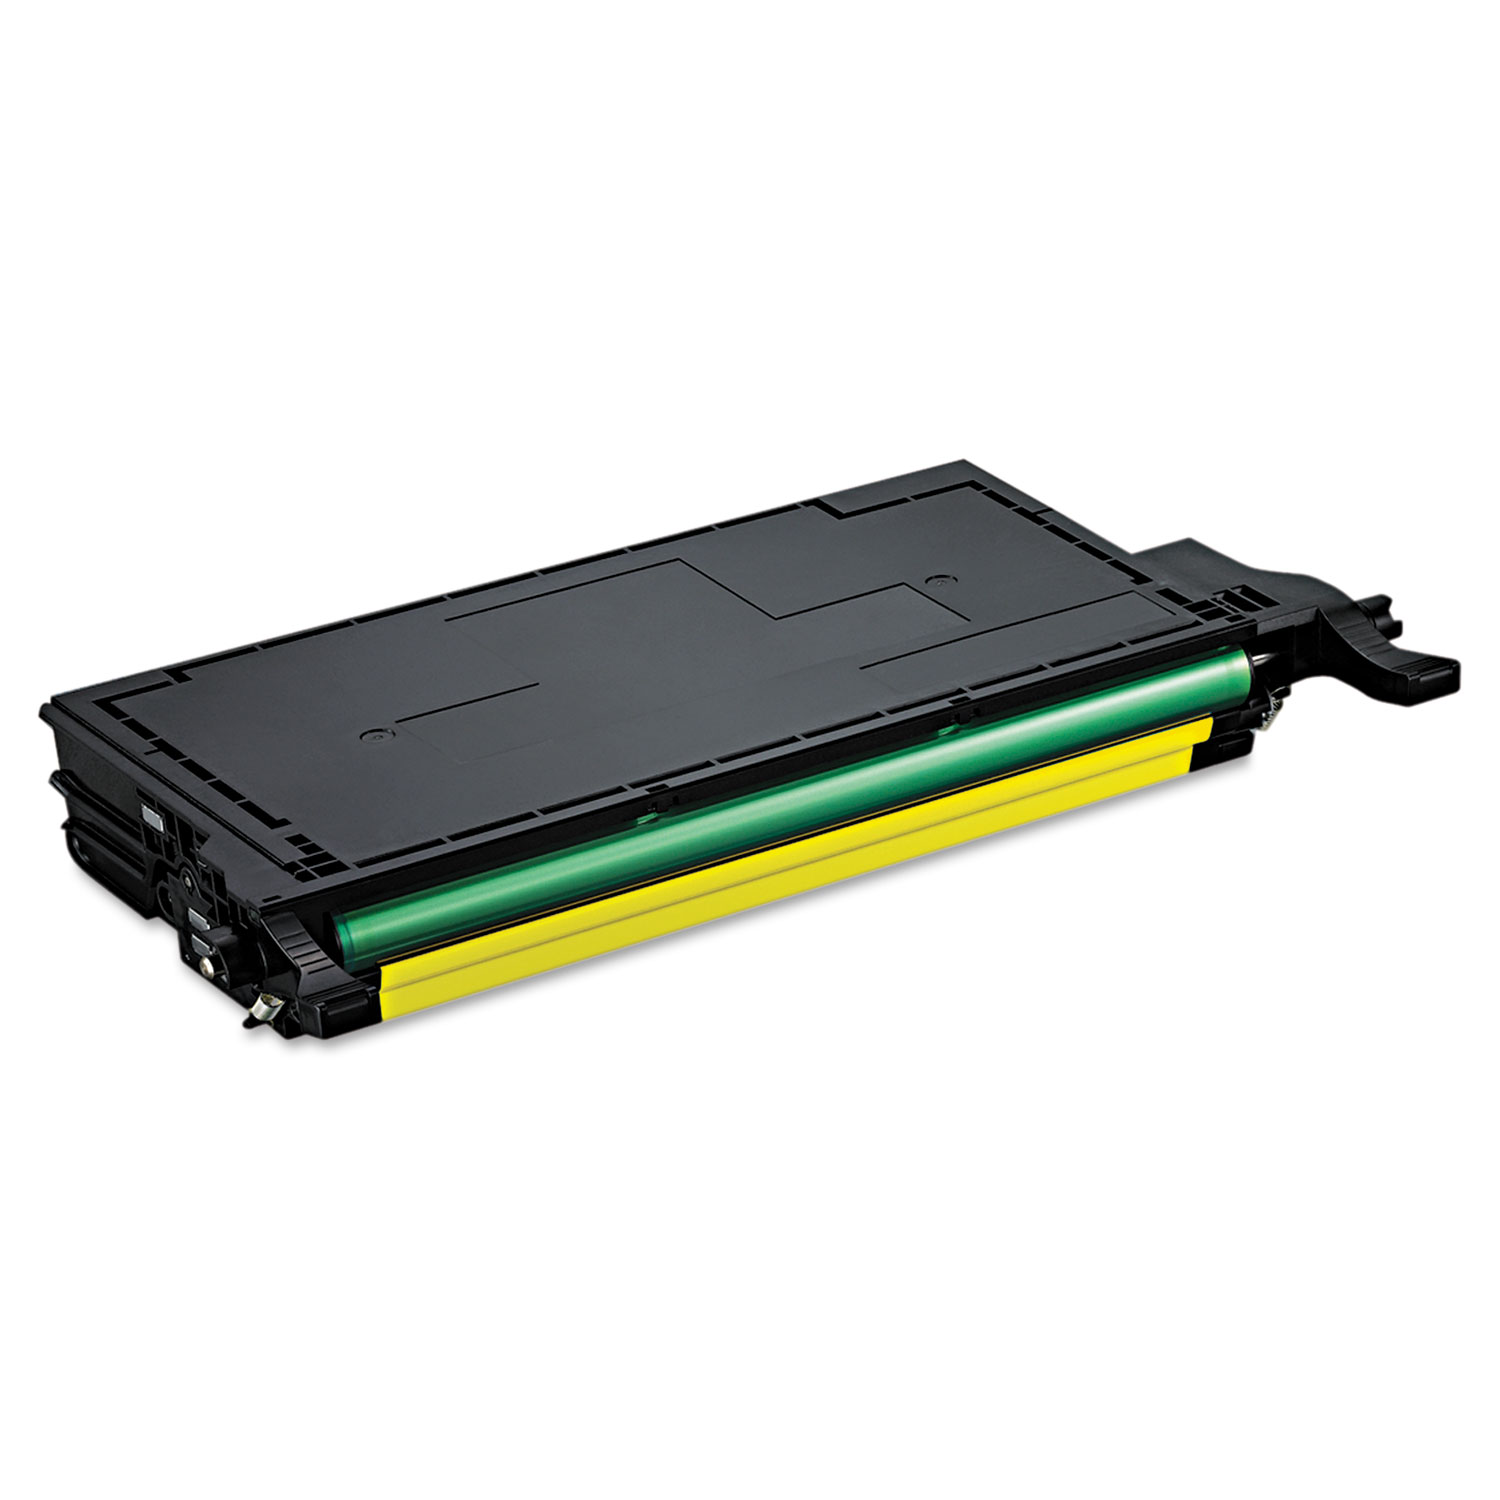 CLTY508L (CLT-Y508L) High-Yield Toner, 4,000 Page-Yield, Yellow